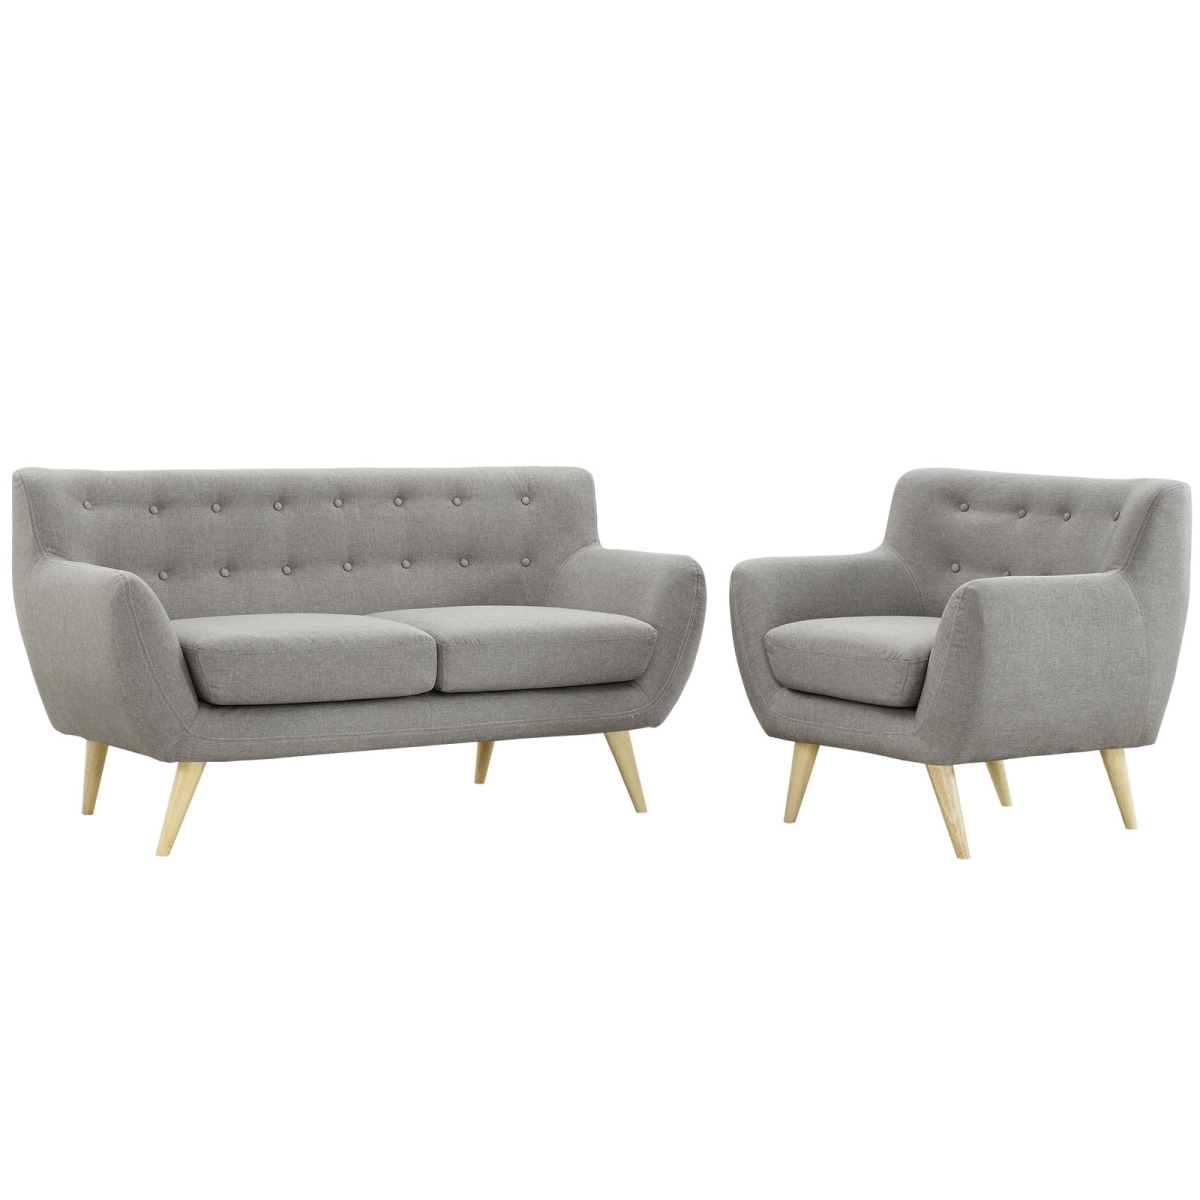 Eastend Eei-1783-lgr-set Remark Loveseat & Armchair Set In Tufted Light Gray Fabric On Natural Wood Legs